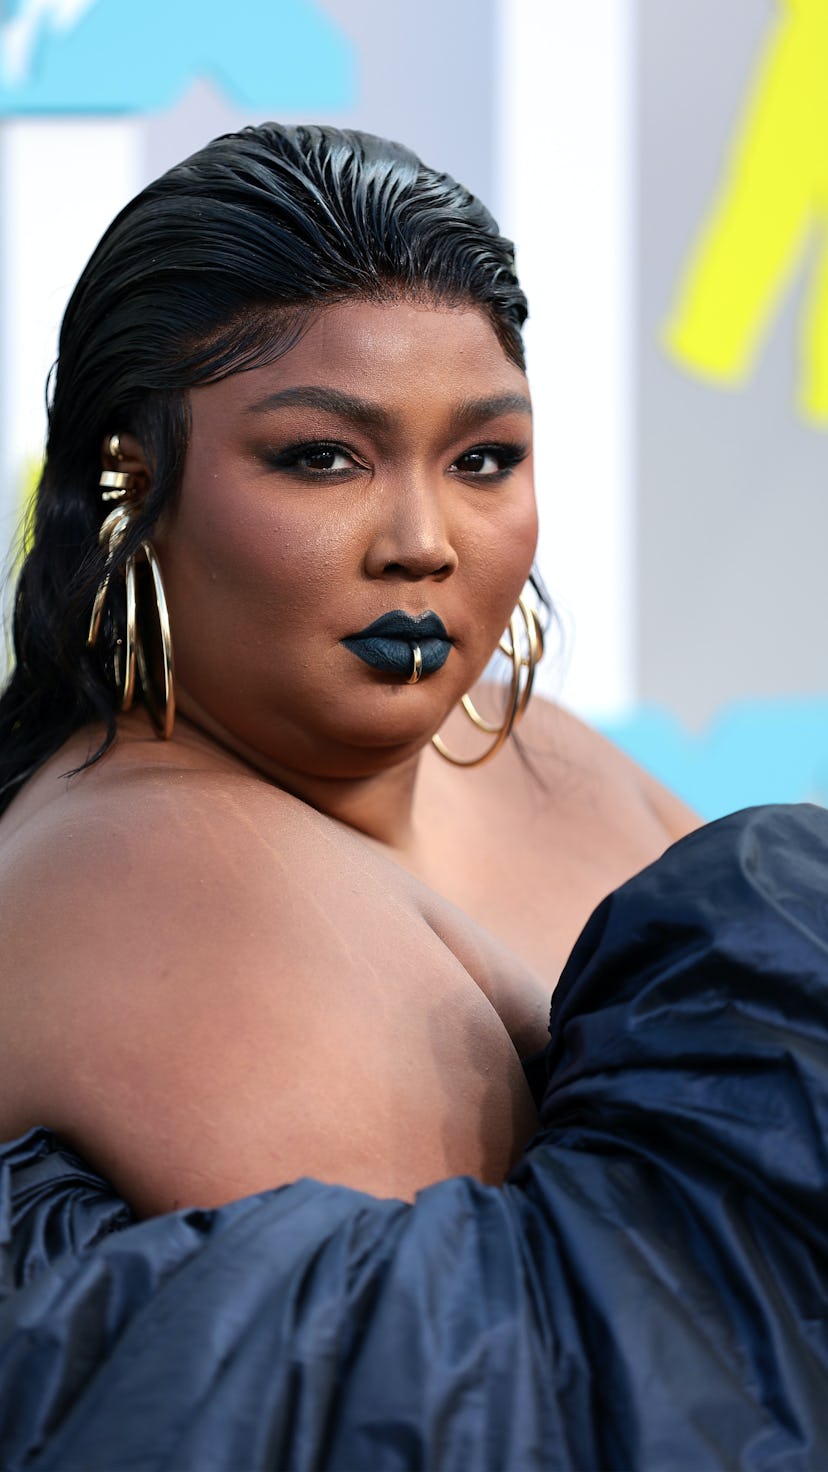 Lizzo's slicked back wet look hair one of the best hairstyles on the MTV VMAs 2022 red carpet.